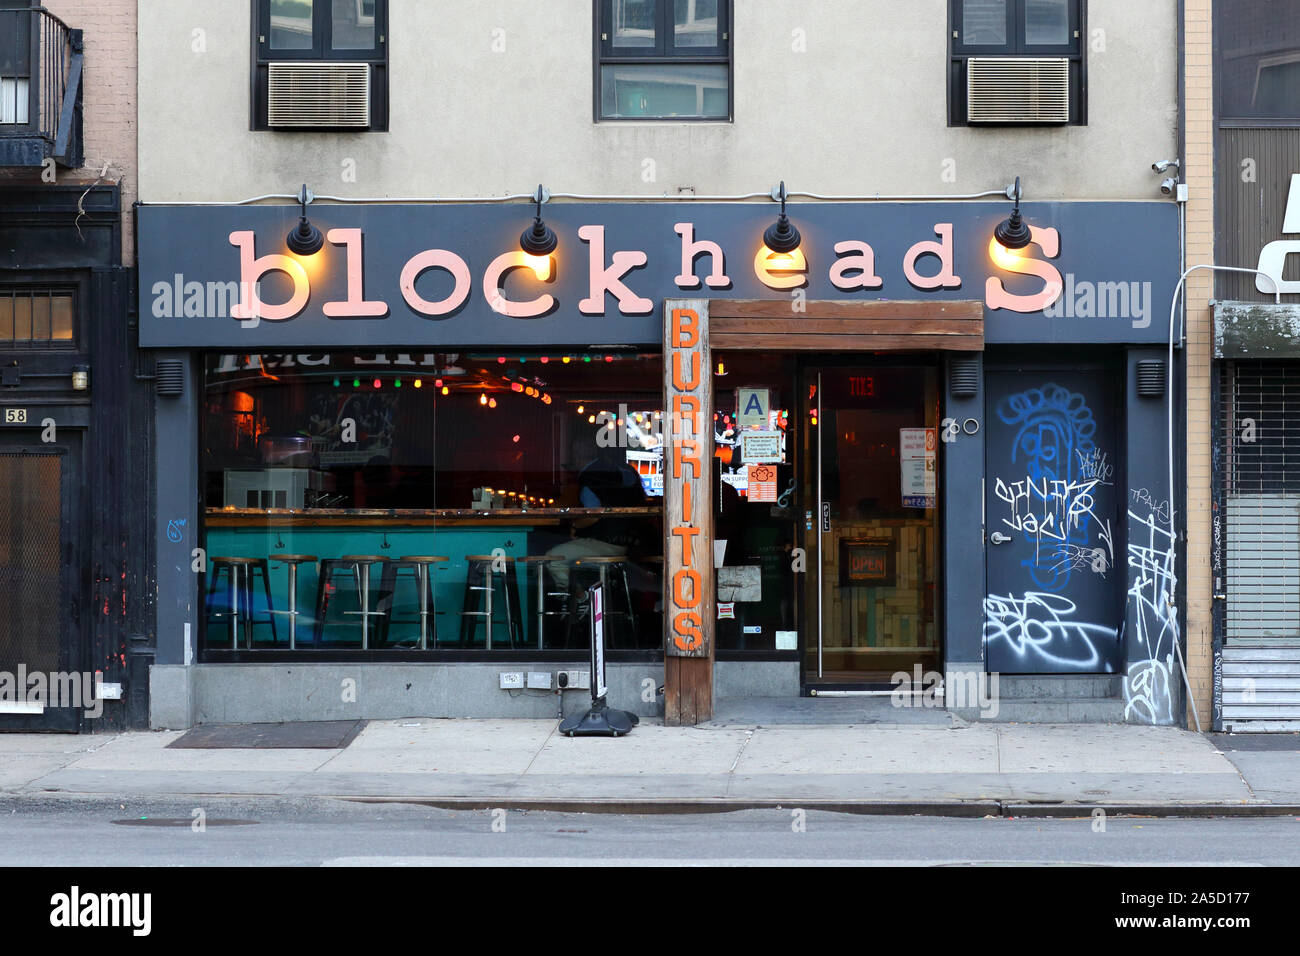 [historical storefront] Blockheads, 60 Third Avenue, New York, NYC storefront photo of a bar in the East Village neighborhood of Manhattan. Stock Photo